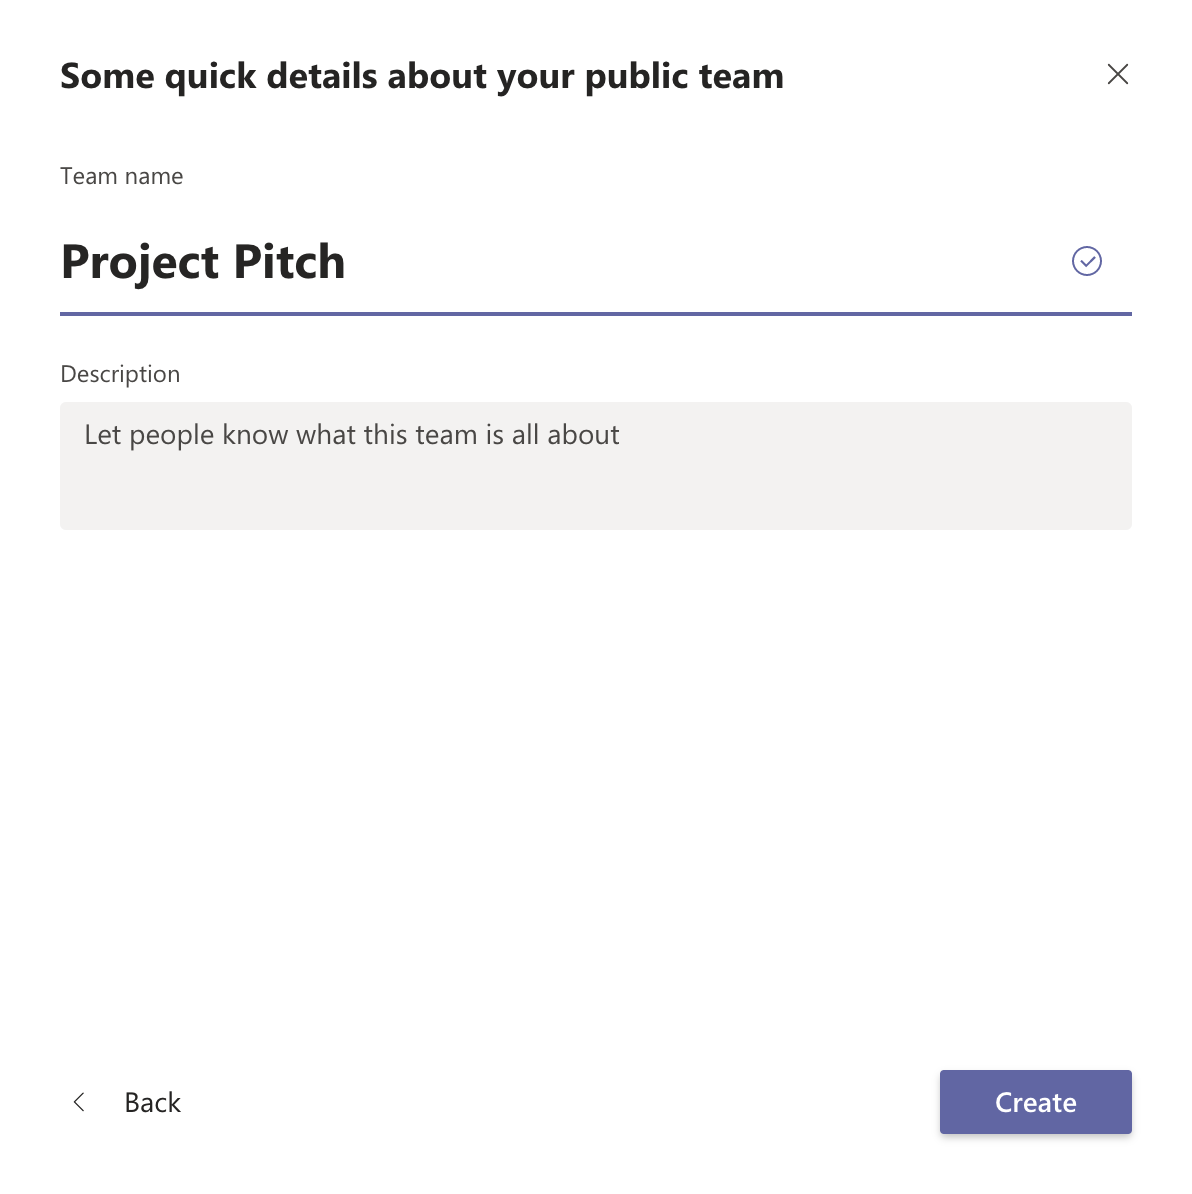 New team named Project pitch.